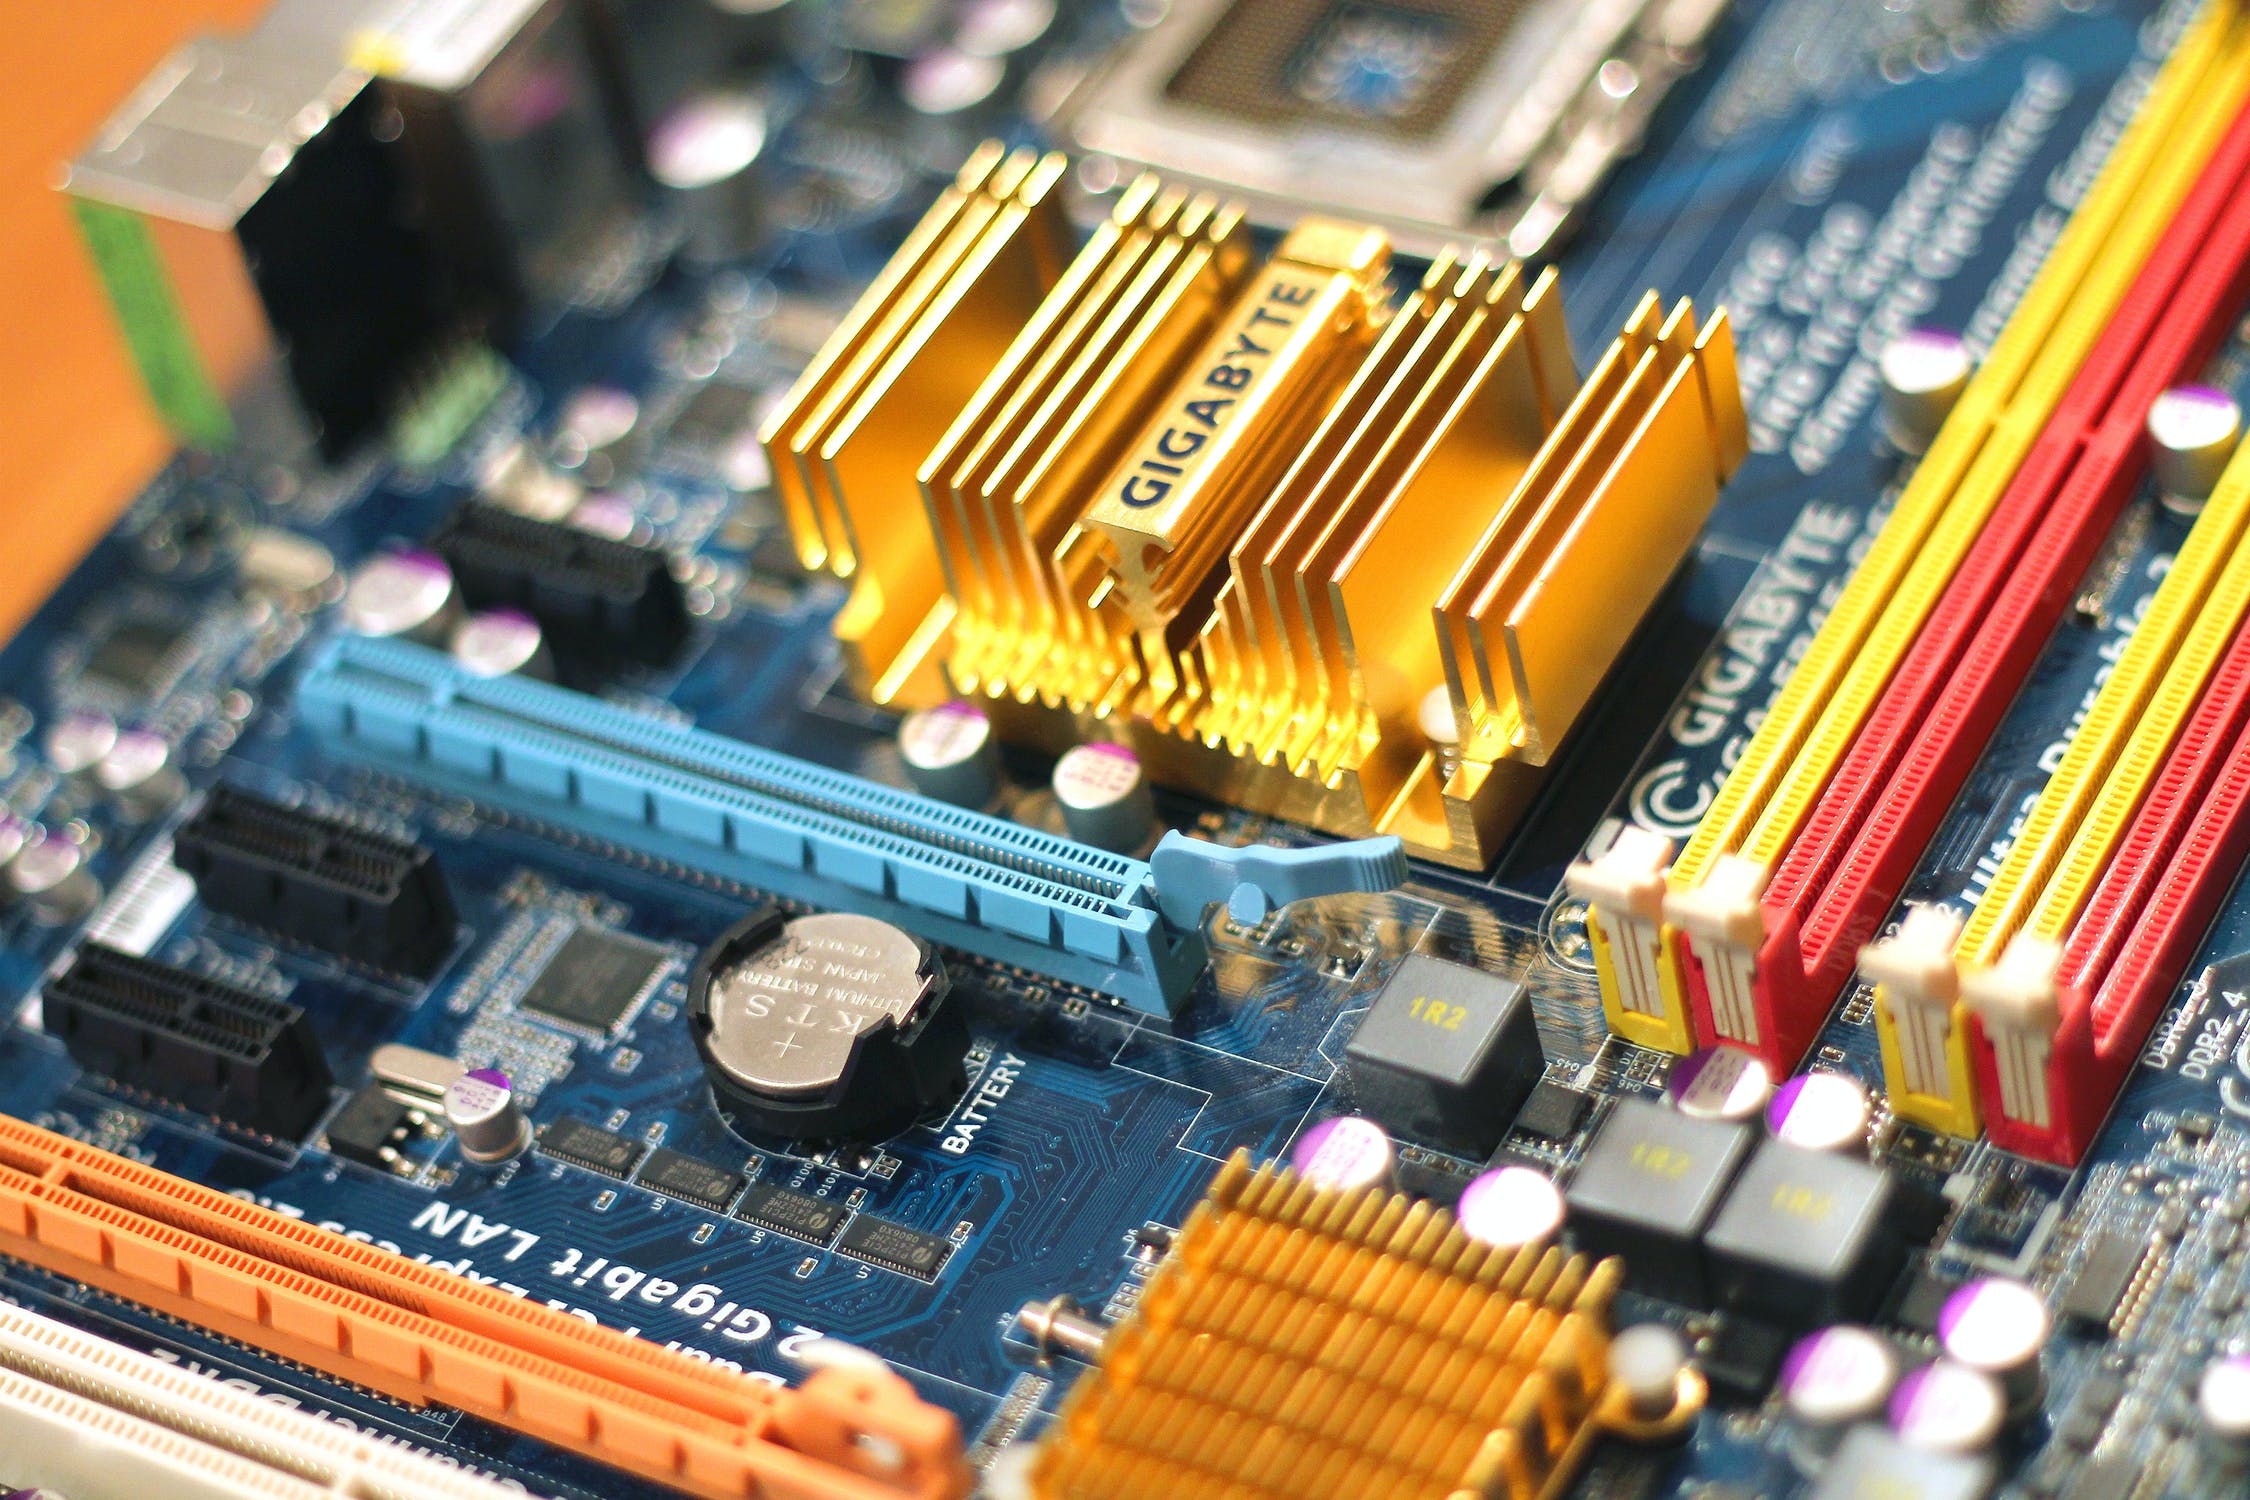 A Beginner’s Guide to Computer Motherboards